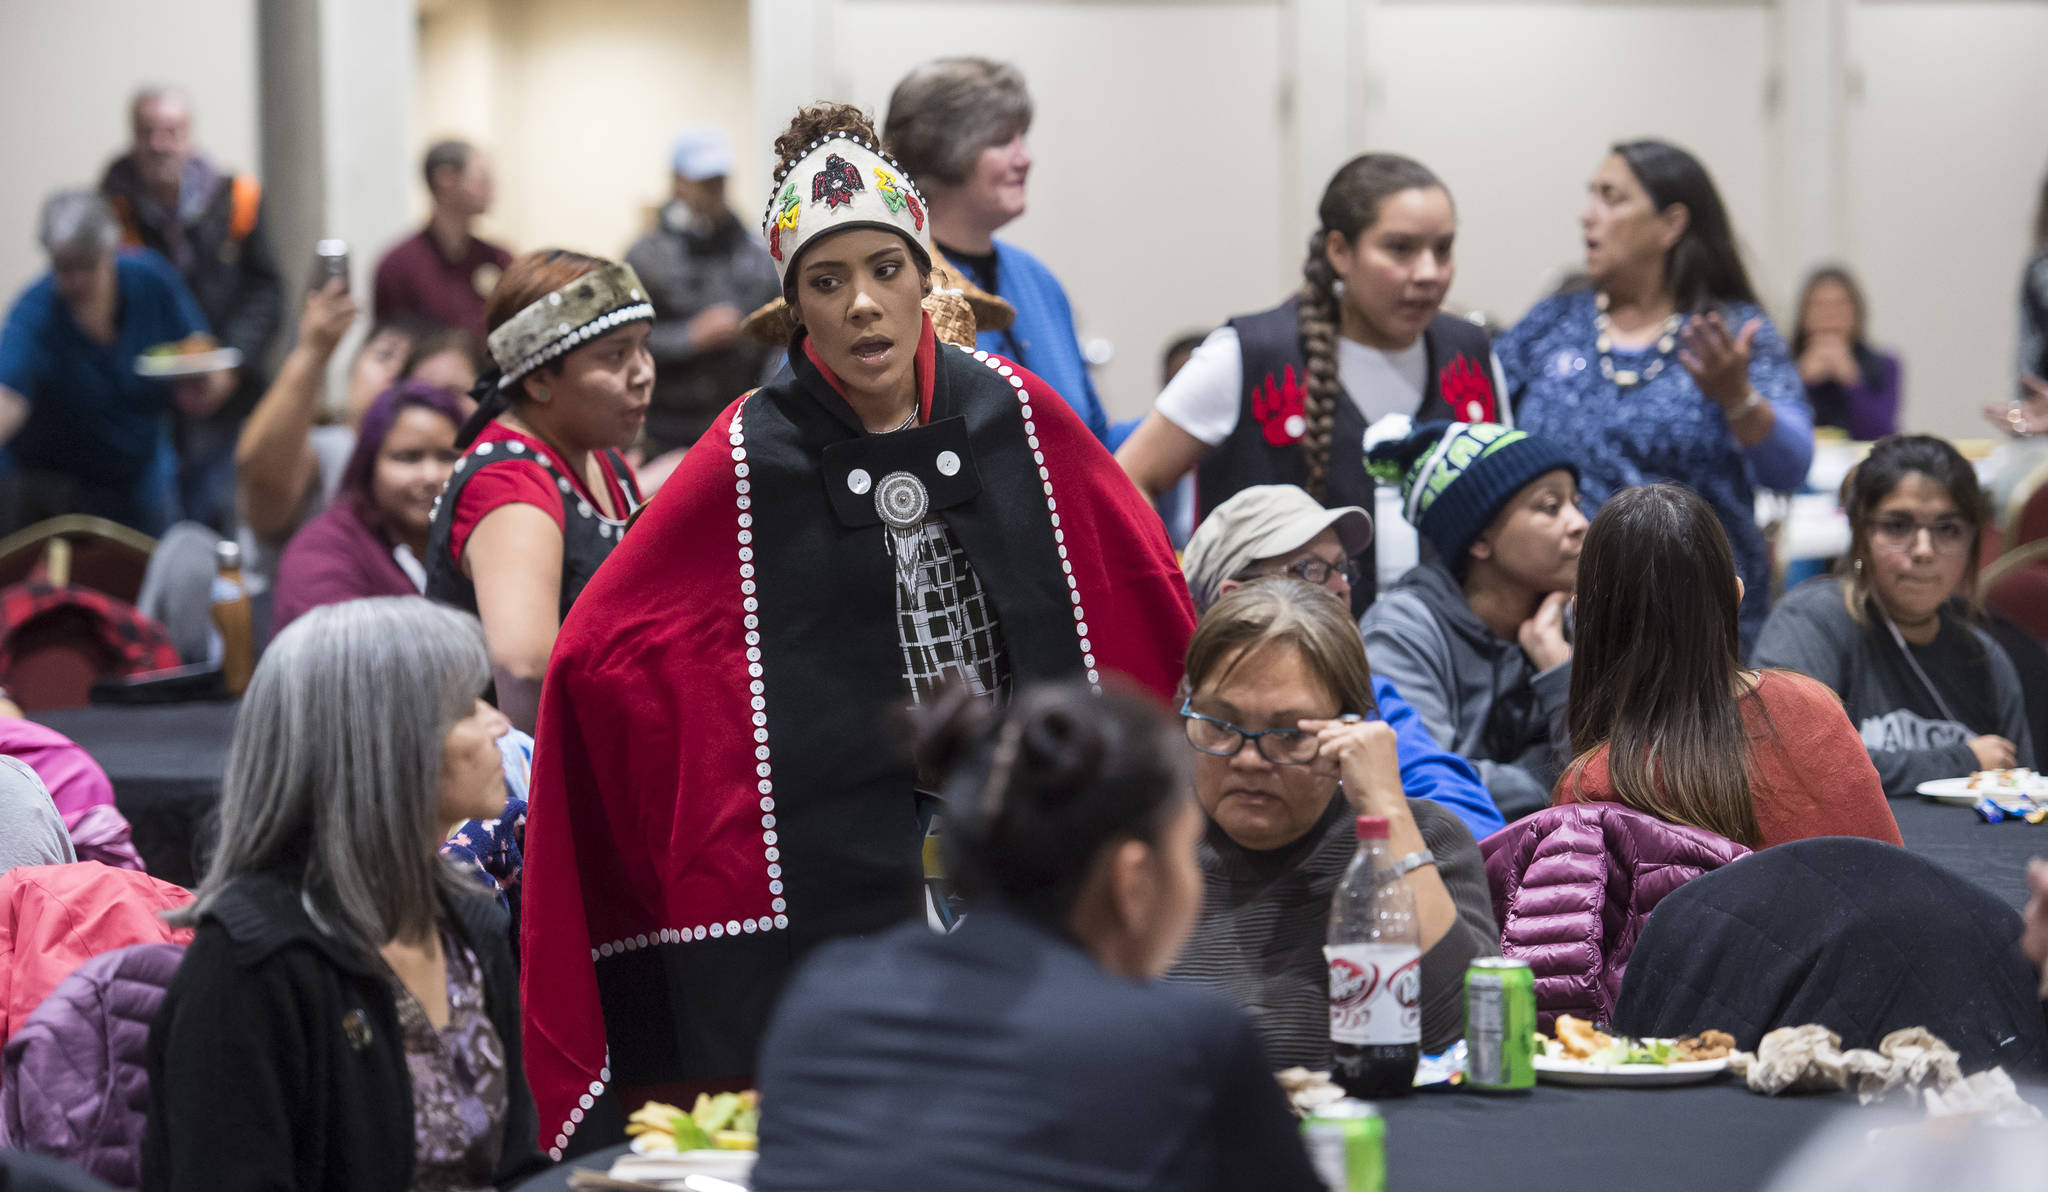 Members of the Woosh.ji.een Dance Group dance dance between tables of people attending a Celebrate Survivors gathering sponsored by Central Council Tlingit and Haida Indian Tribes of Alaska and AWARE in the Elizabeth Peratrovich Hall on Tuesday, Oct. 23, 2018. October is Domestic Violence Awareness Month. (Michael Penn | Juneau Empire)